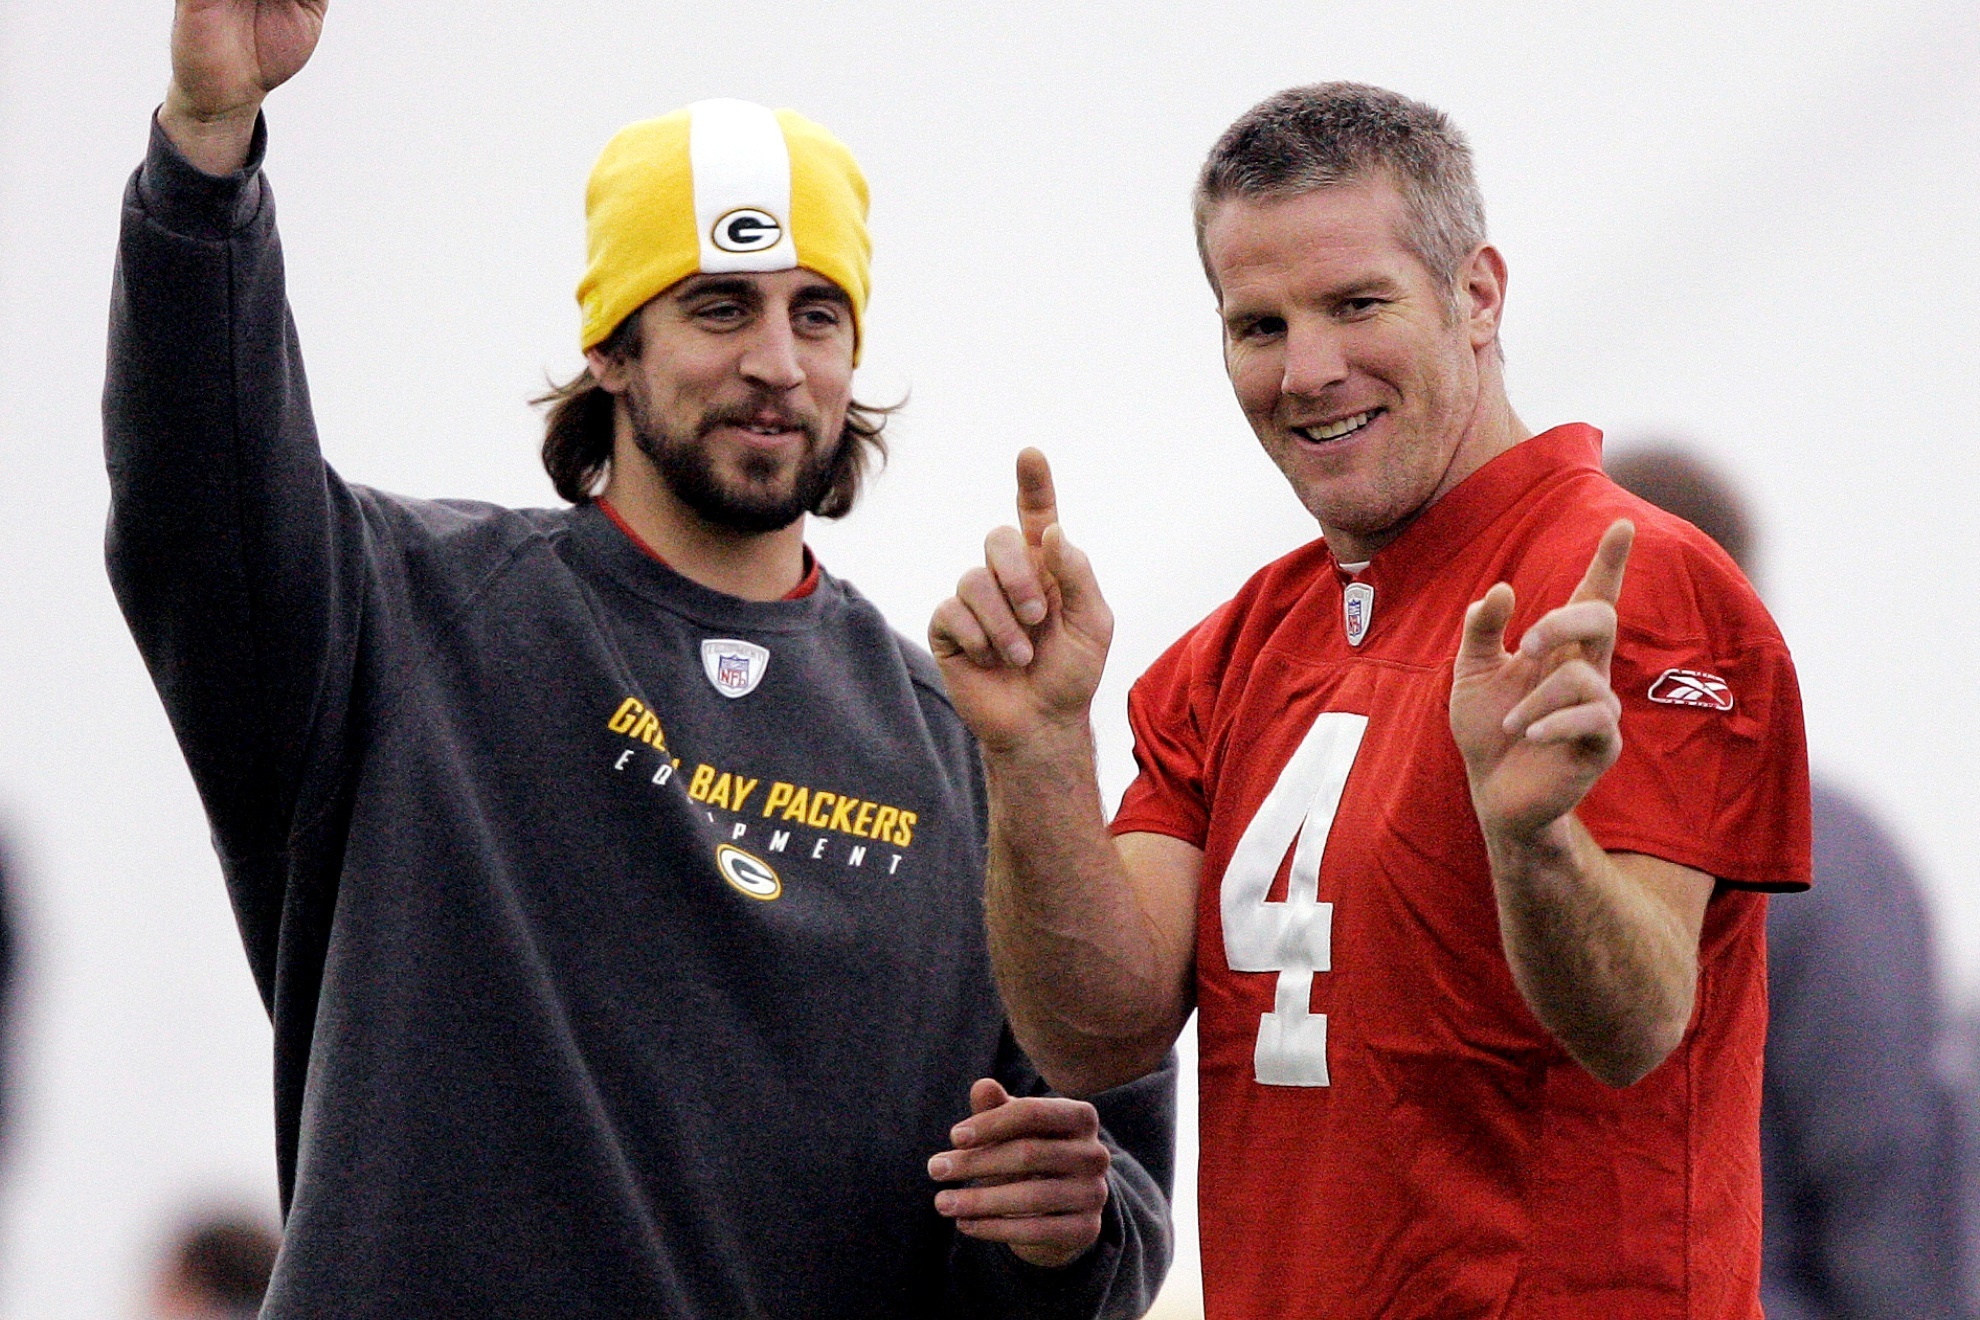 Rodgers and Favre during their stint with the Packers.